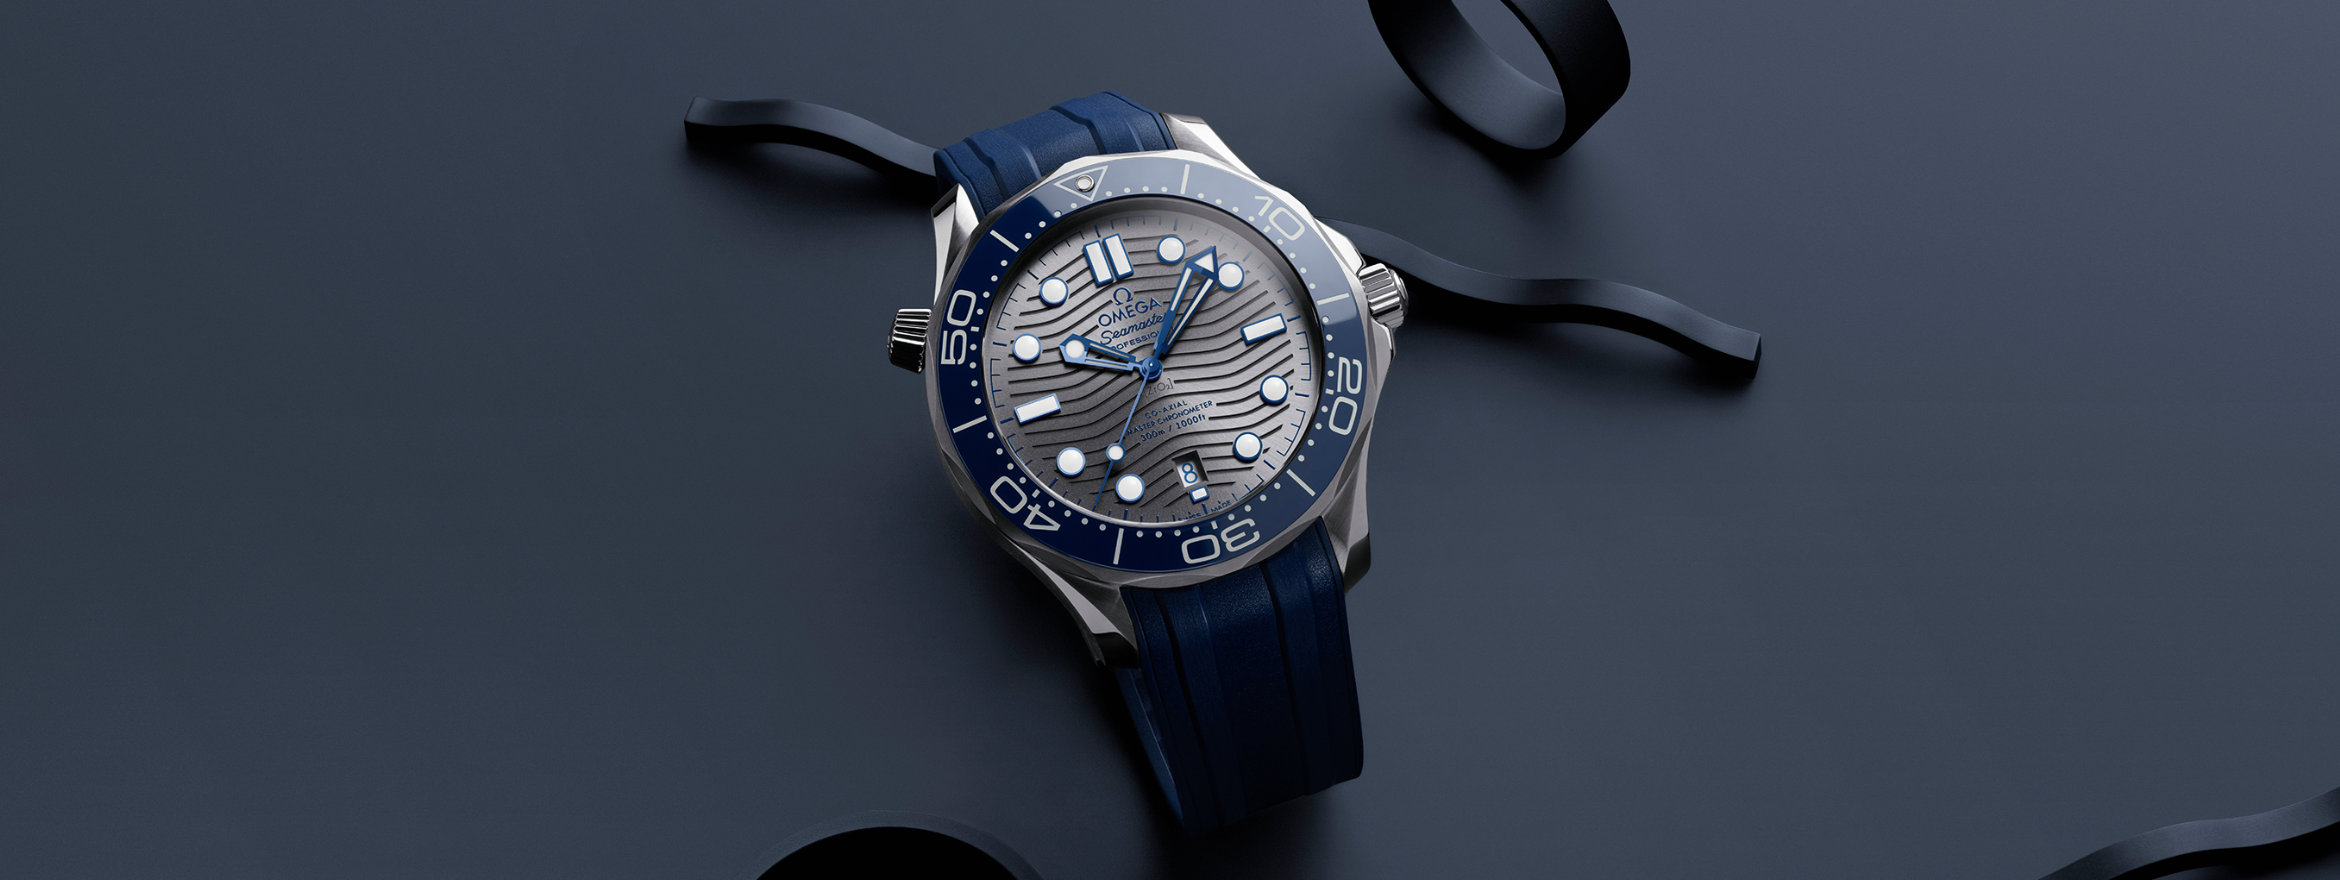 The History Behind the Omega Seamaster